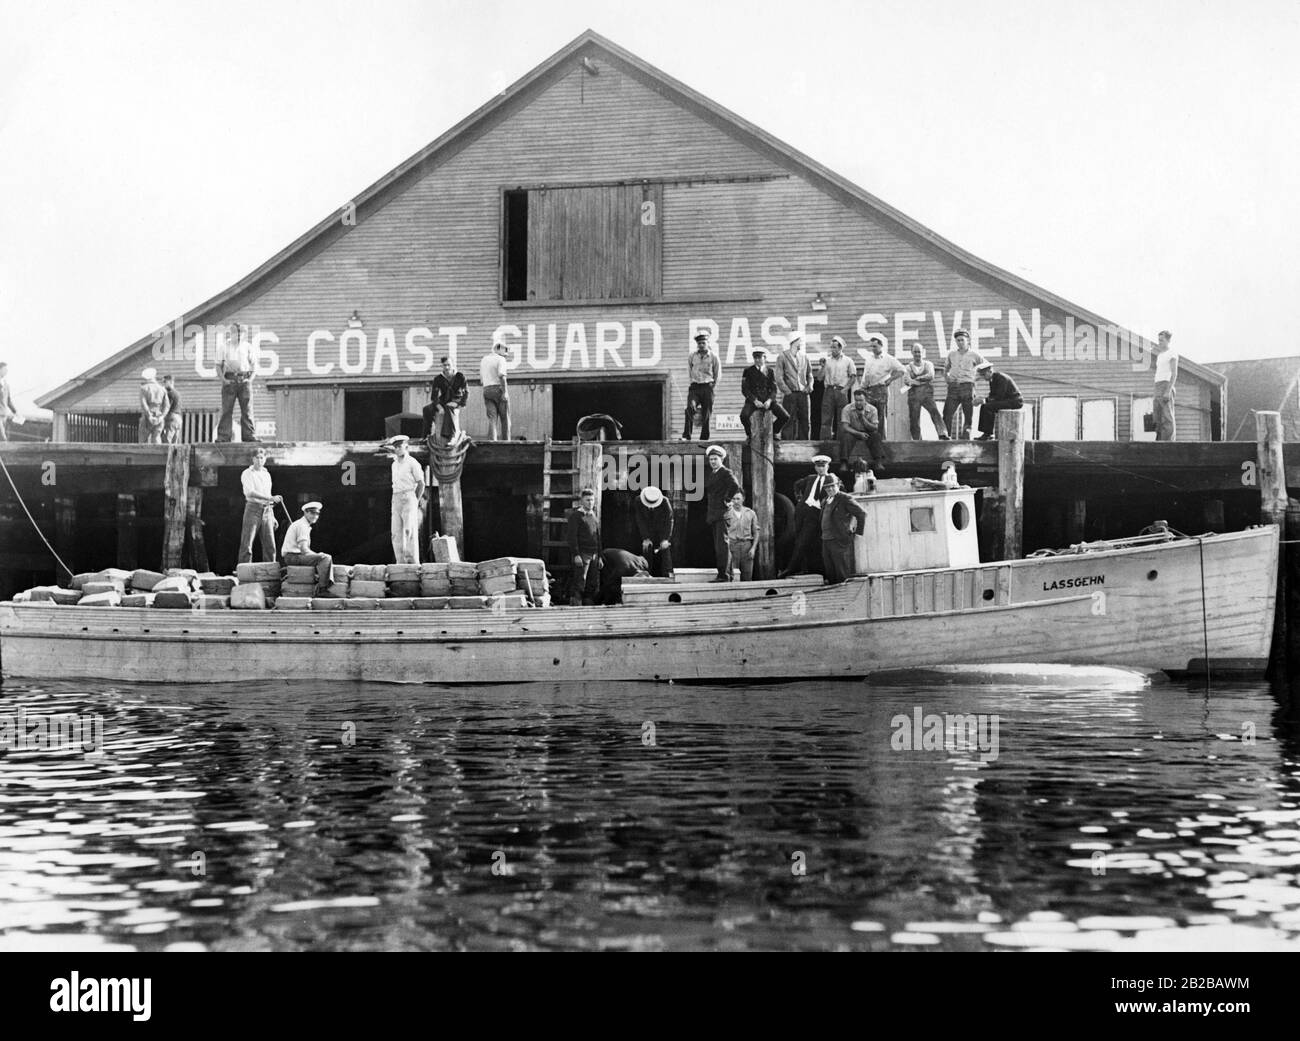 Prohibition: The coast guard ('U.S. Coast Guard Base Seven') and the rum-runner 'Lassgehn' in the harbour of Gloucester in Massachusetts. Stock Photo